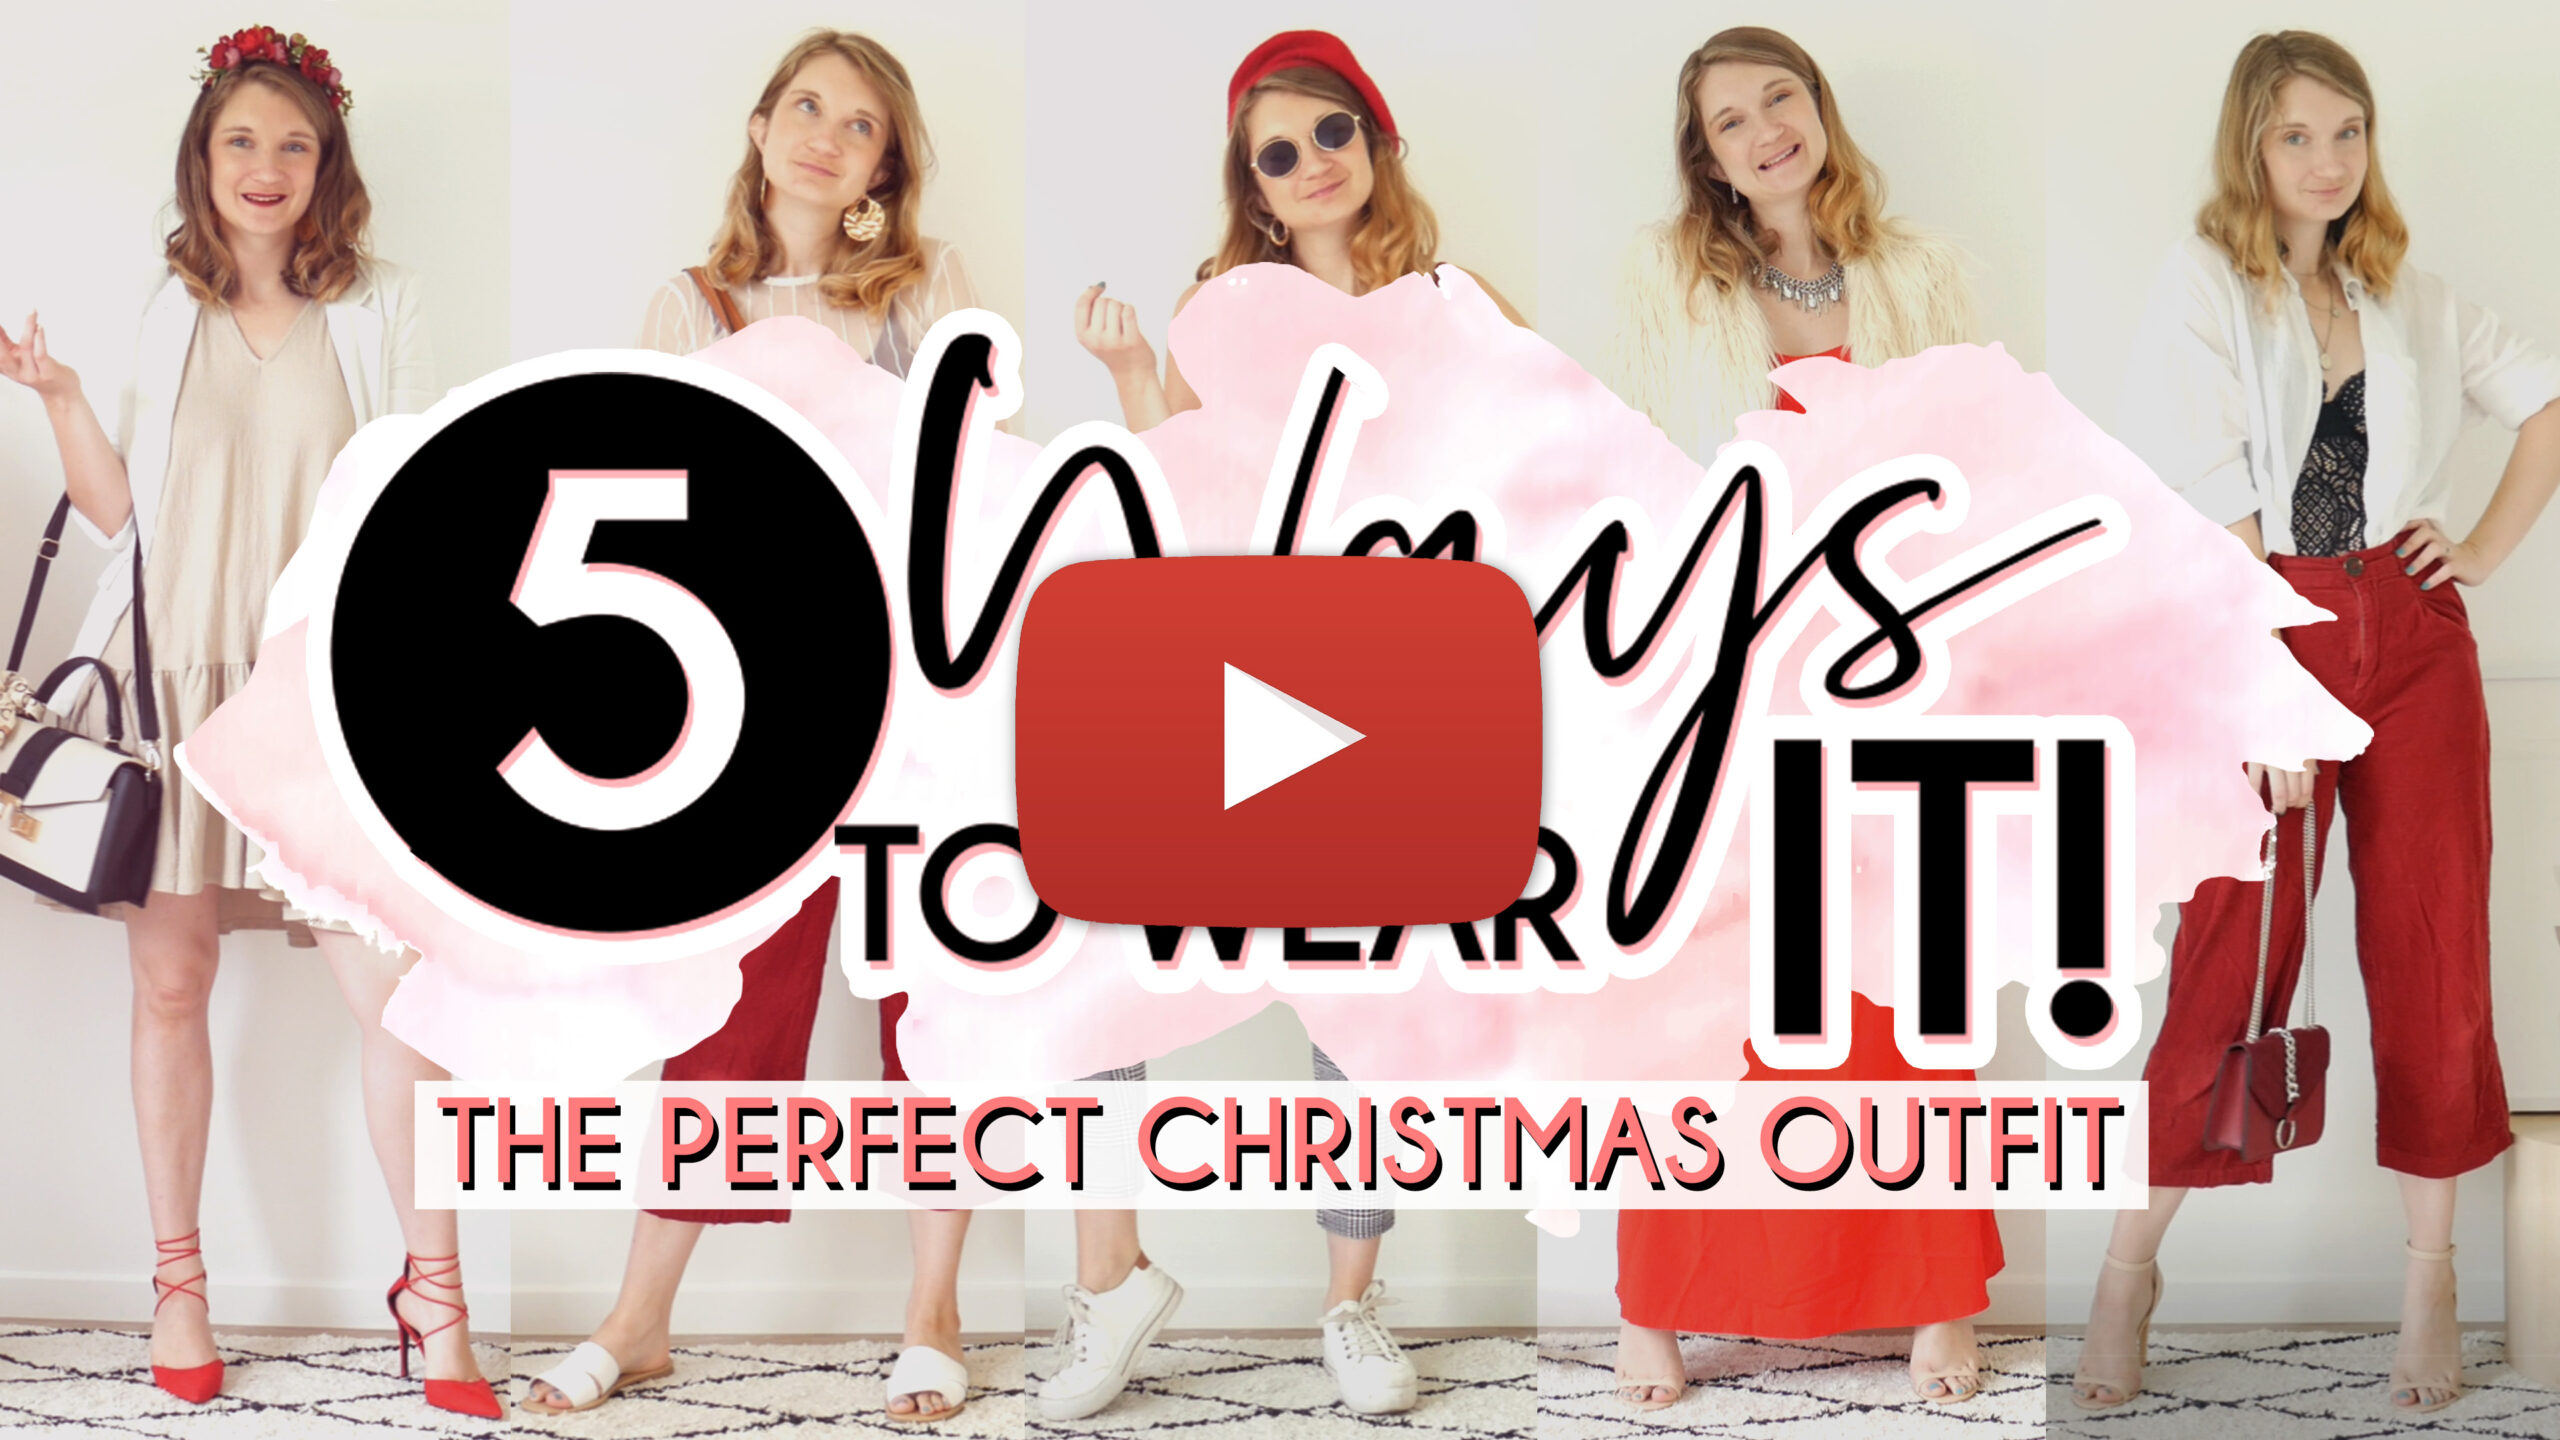 5 Ways to Wear (Christmas Outfits) Youtube Thumbnail Play Button